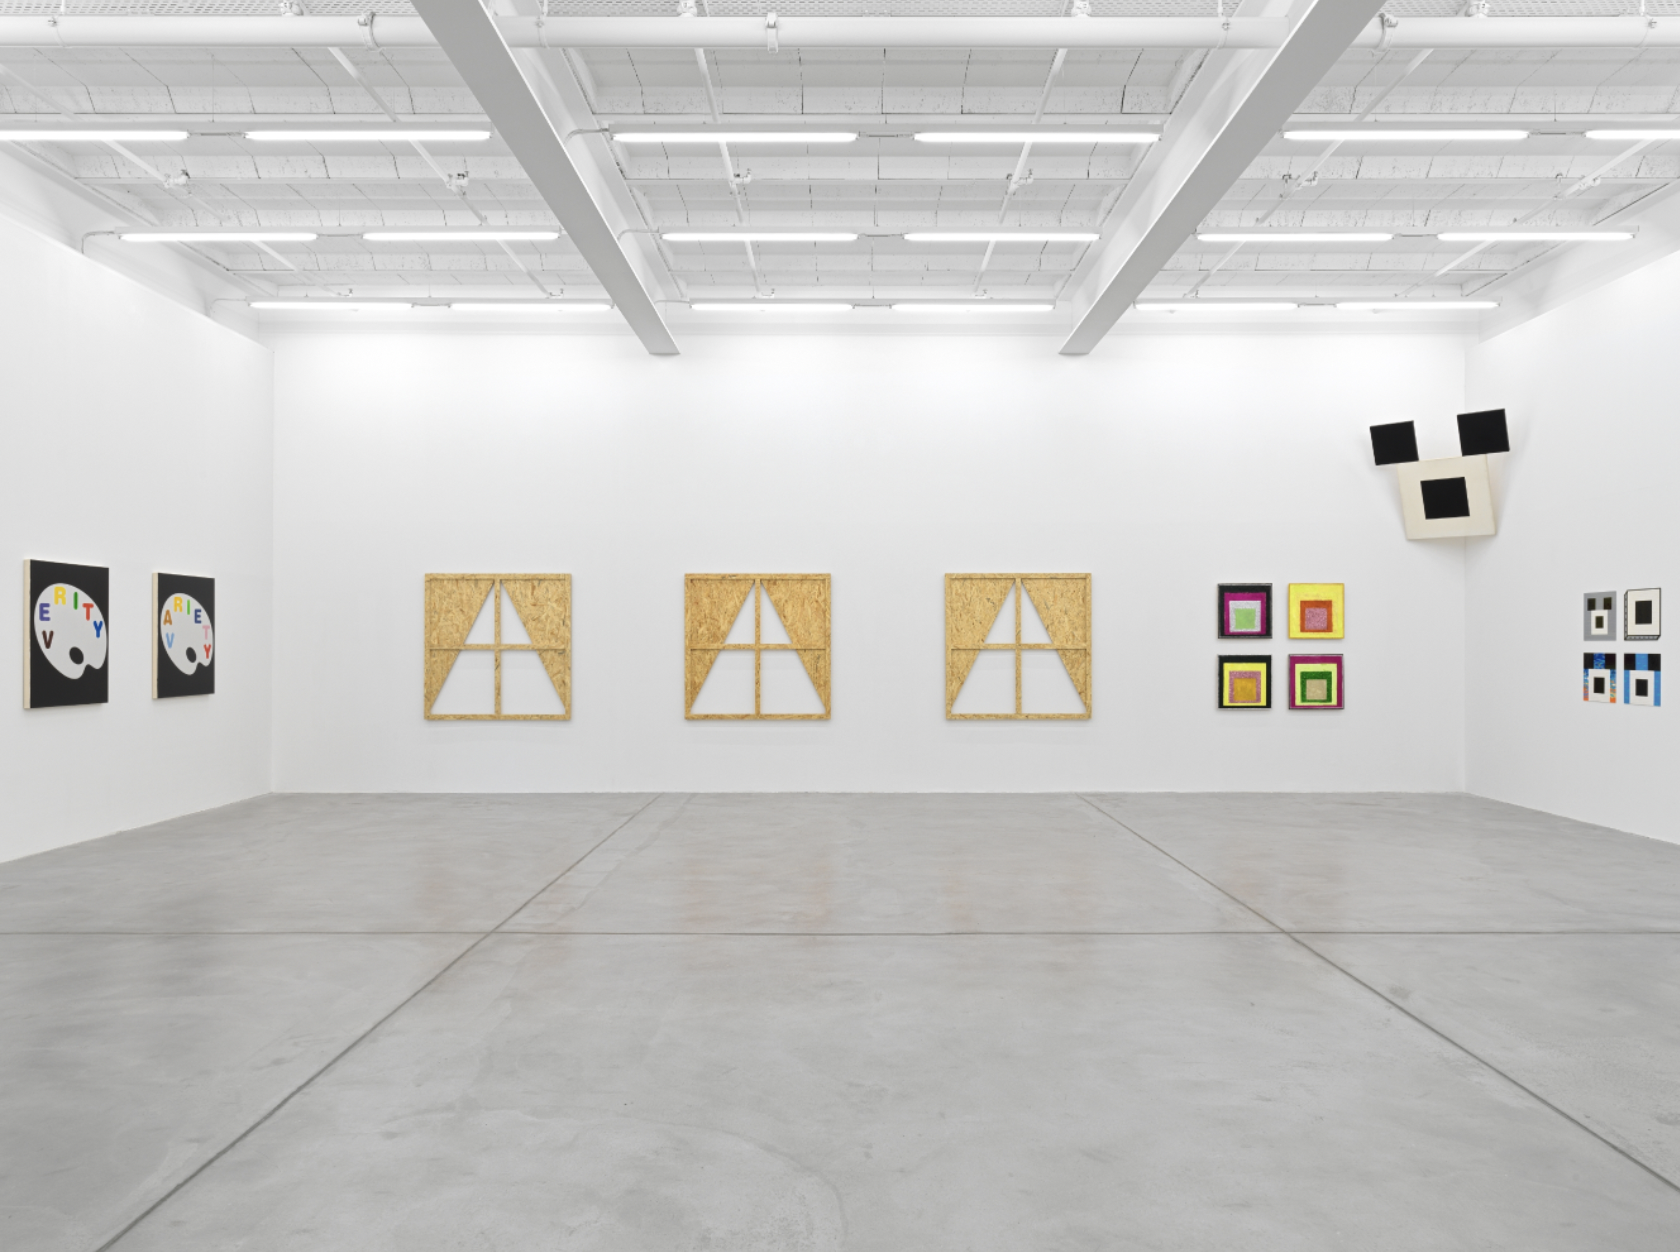 Installation view with works by Jan Kiefer, Gina Fischli, and Anton Bruhin